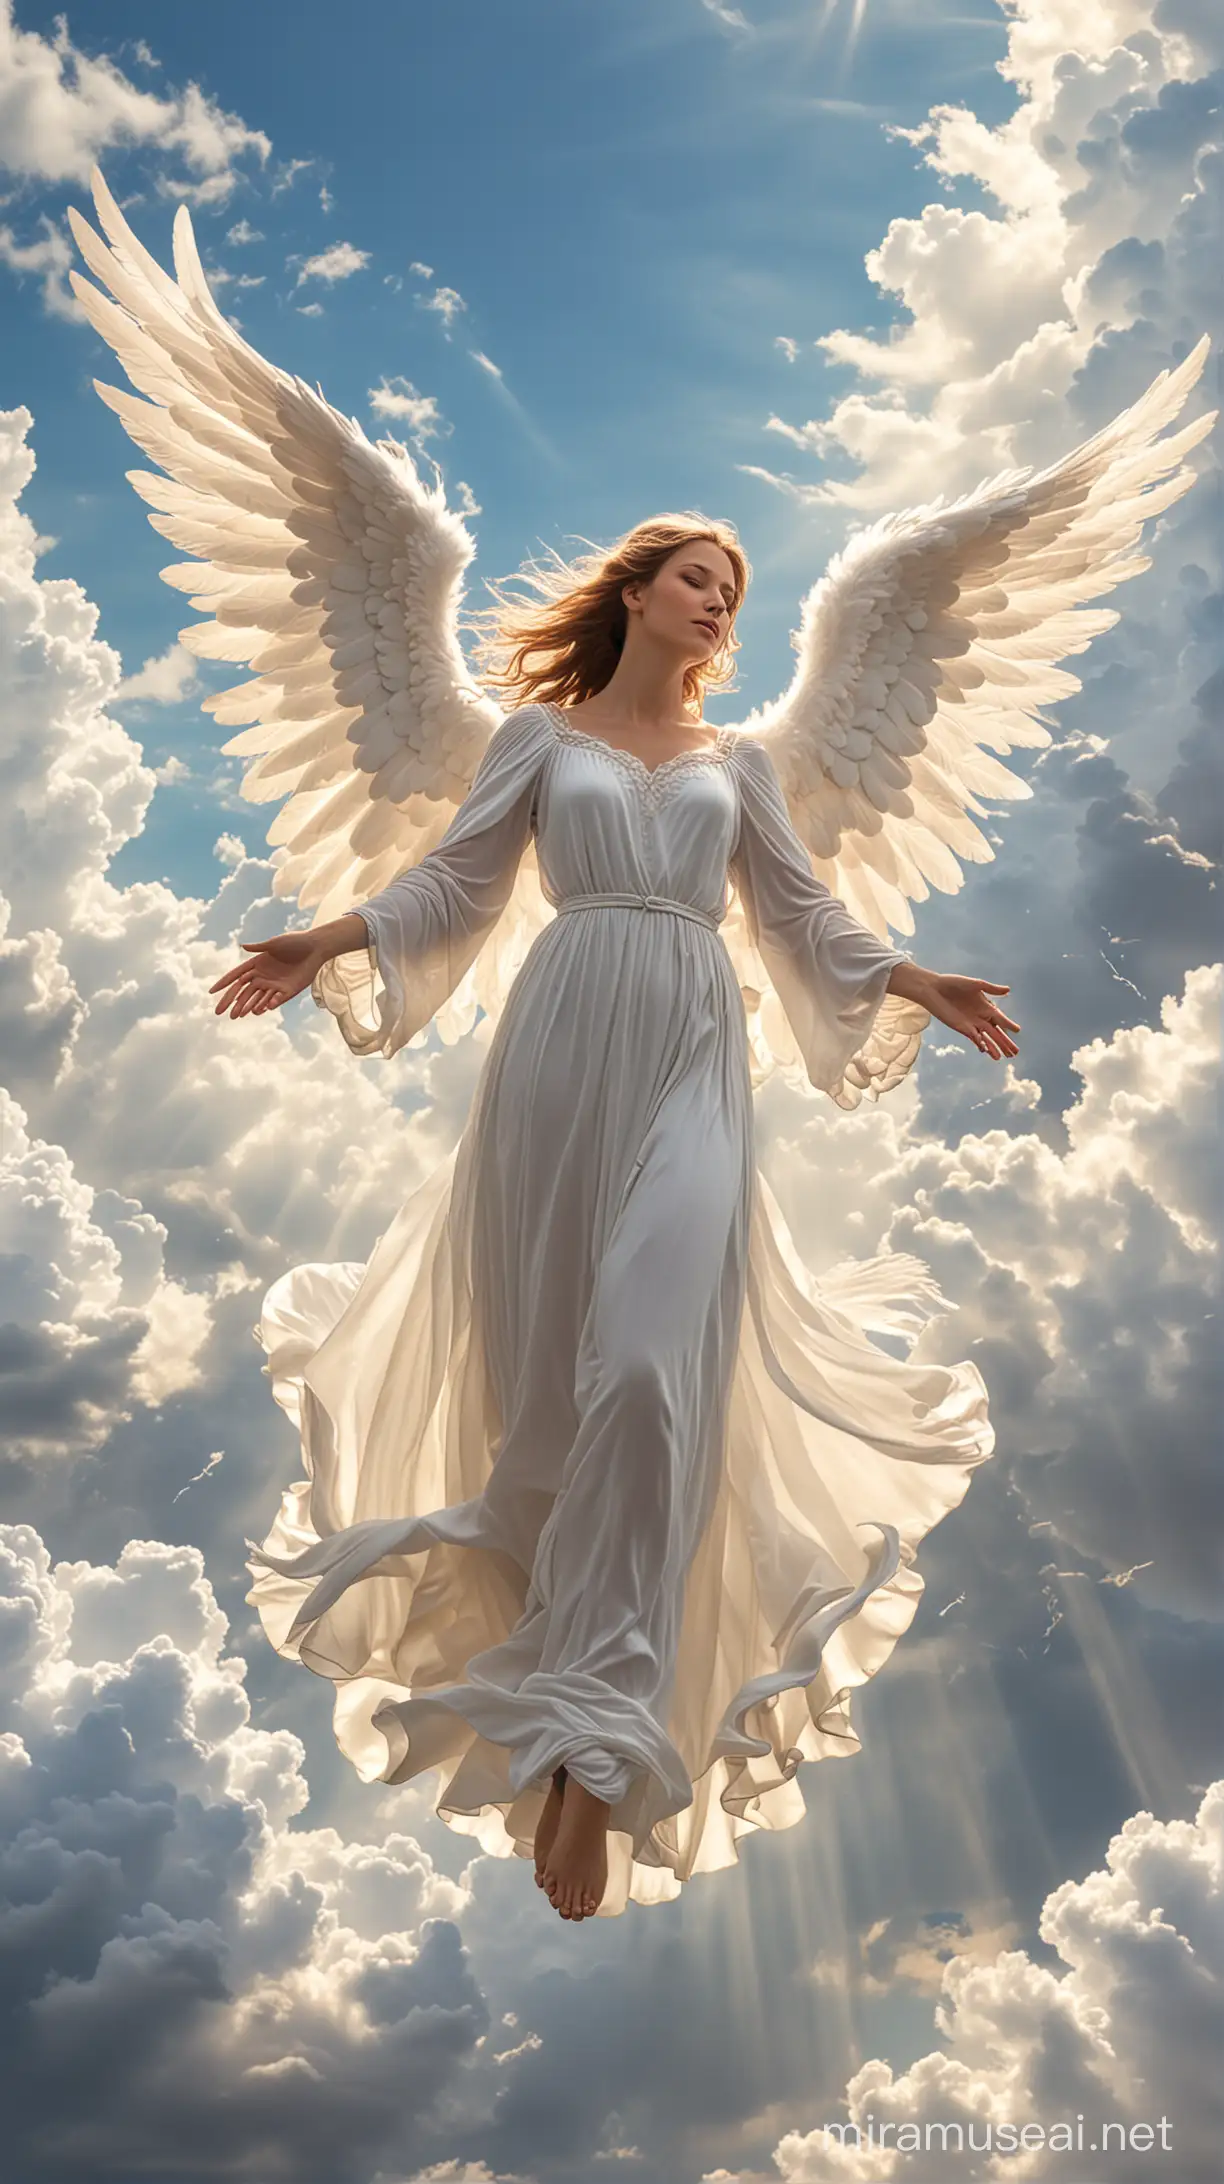 Angel of Love Soaring Amidst Sunlit White Clouds